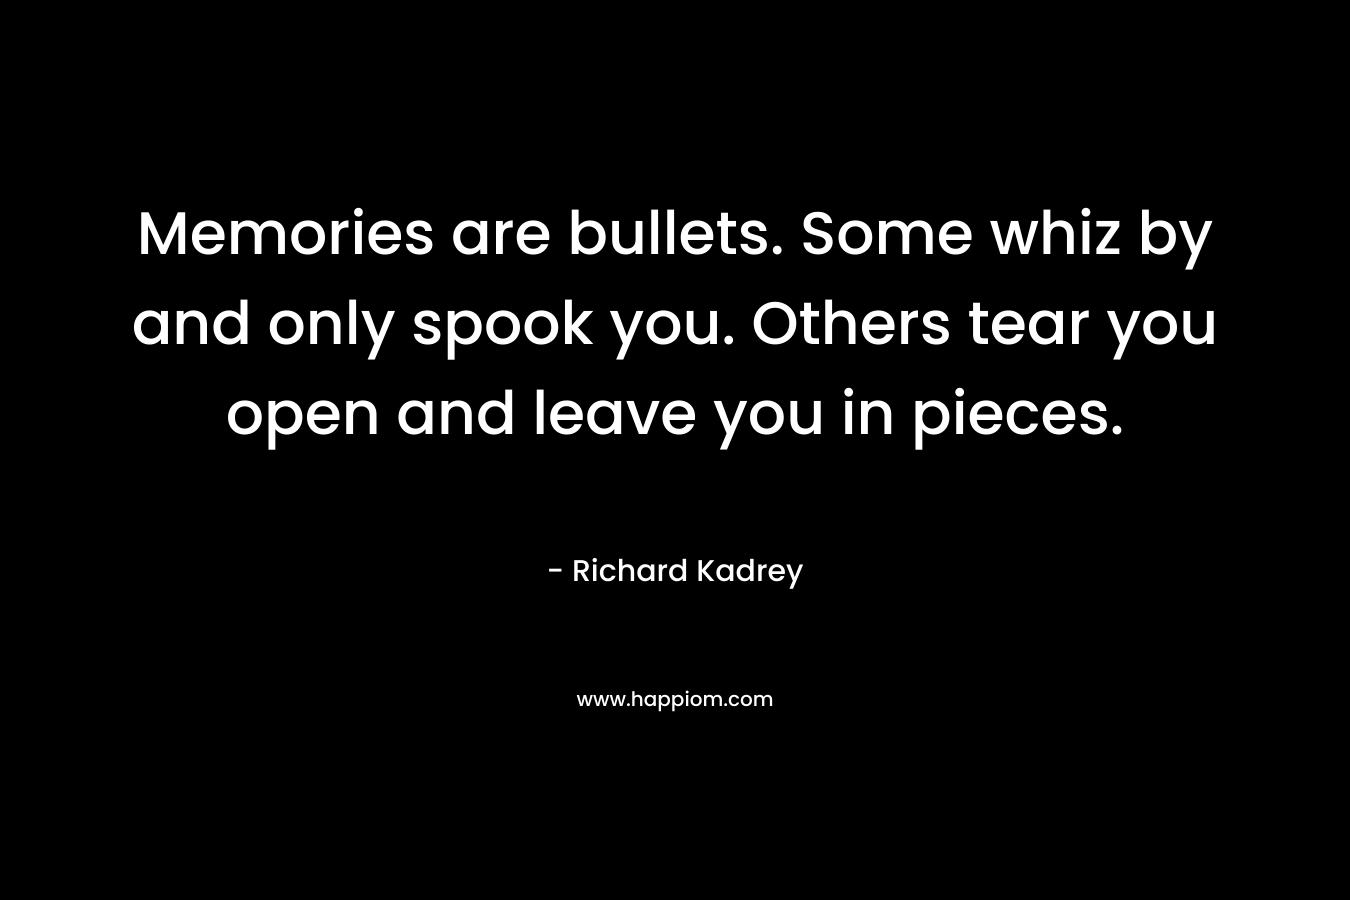 Memories are bullets. Some whiz by and only spook you. Others tear you open and leave you in pieces. – Richard Kadrey